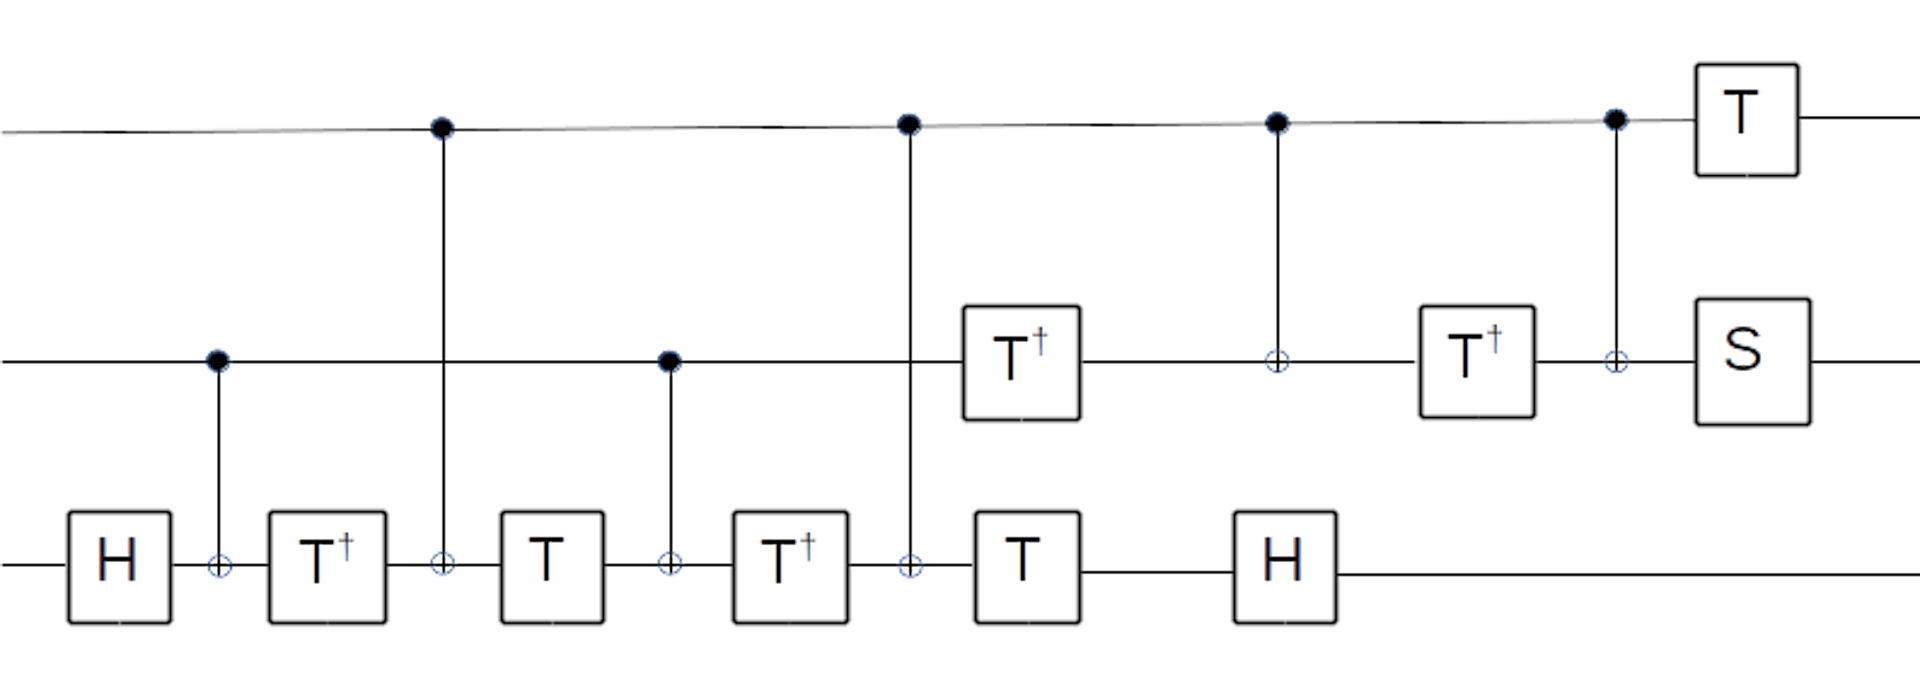 Toffoli gate implemented using Hadamard, T, and S gates